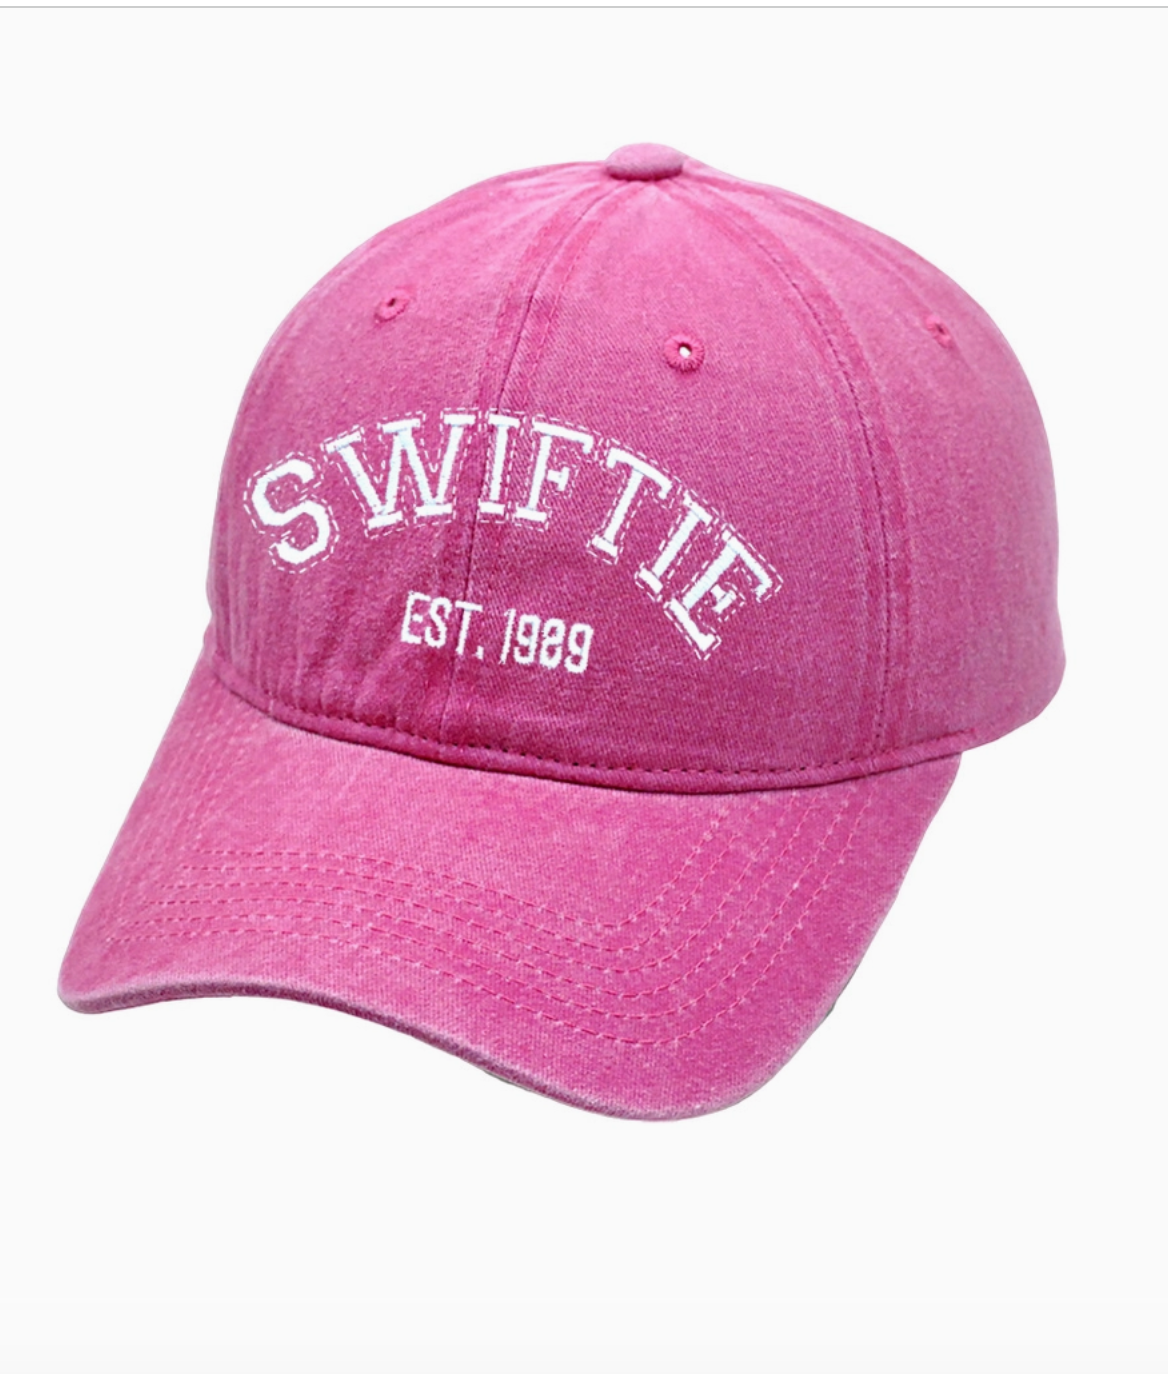 TAYLOR SWIFT EMBROIDERED BASEBALL CAP